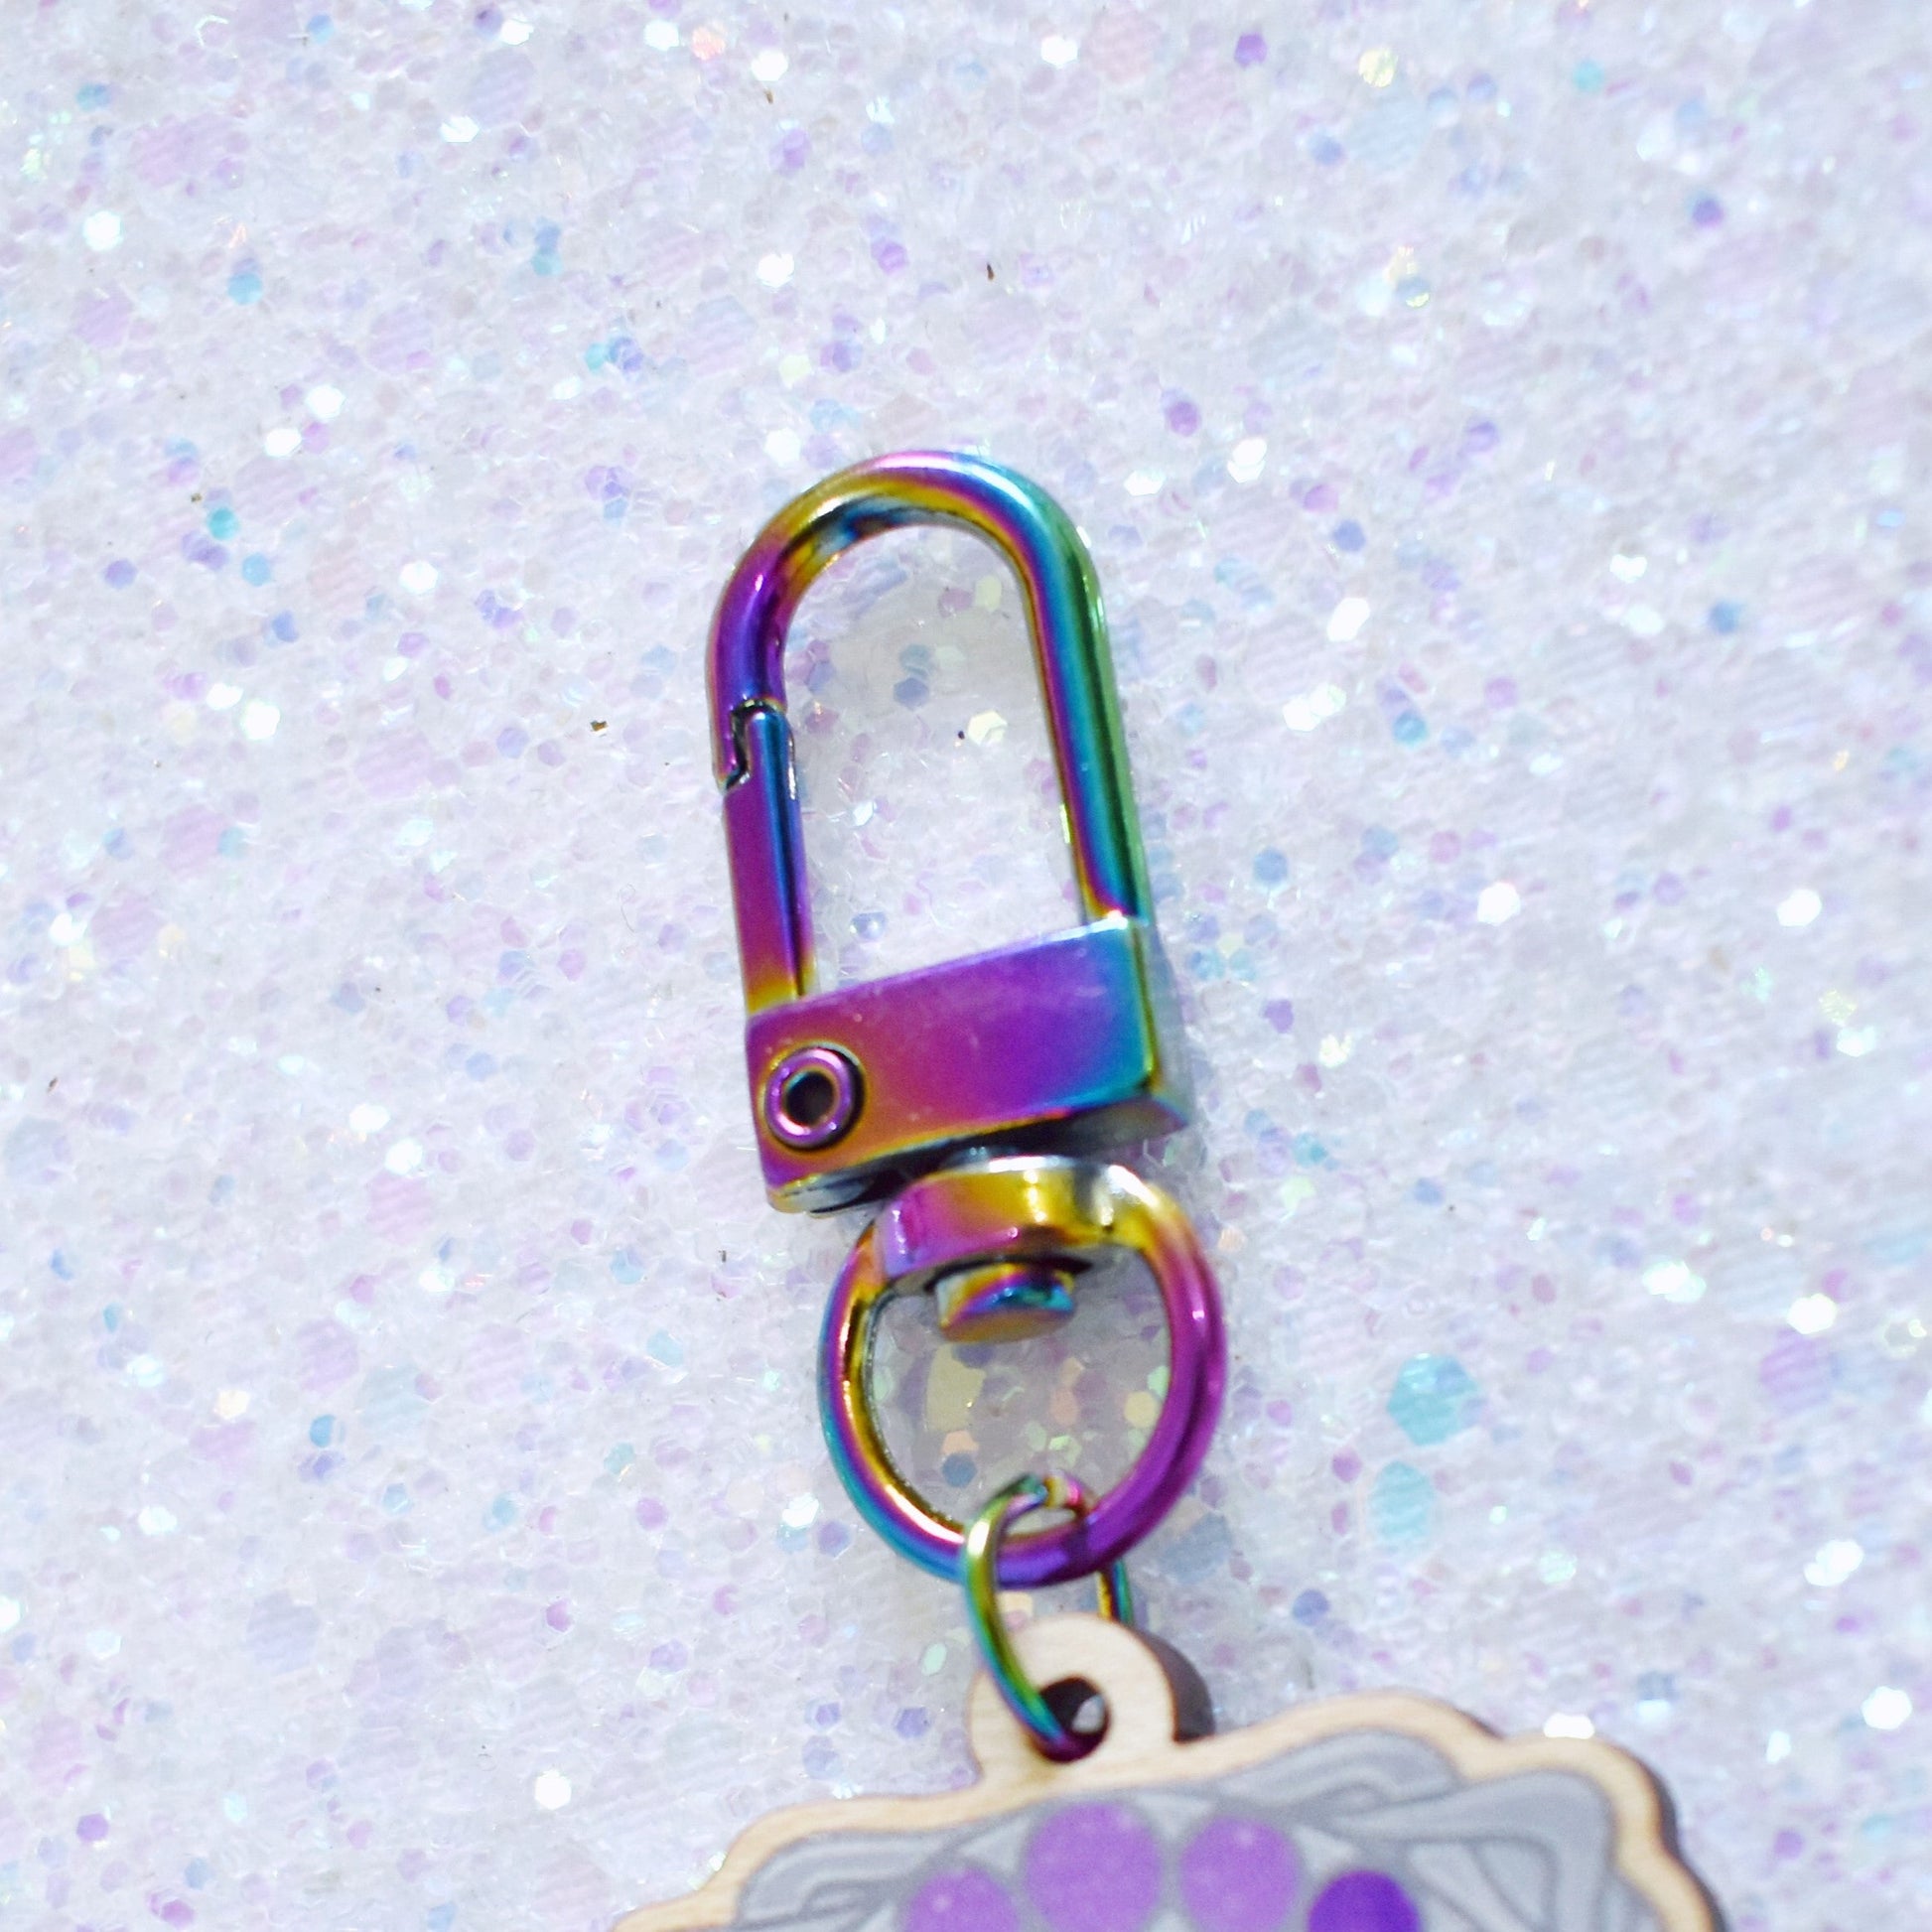 Rainbow metal keychain attachment, attached to the top of wooden charm